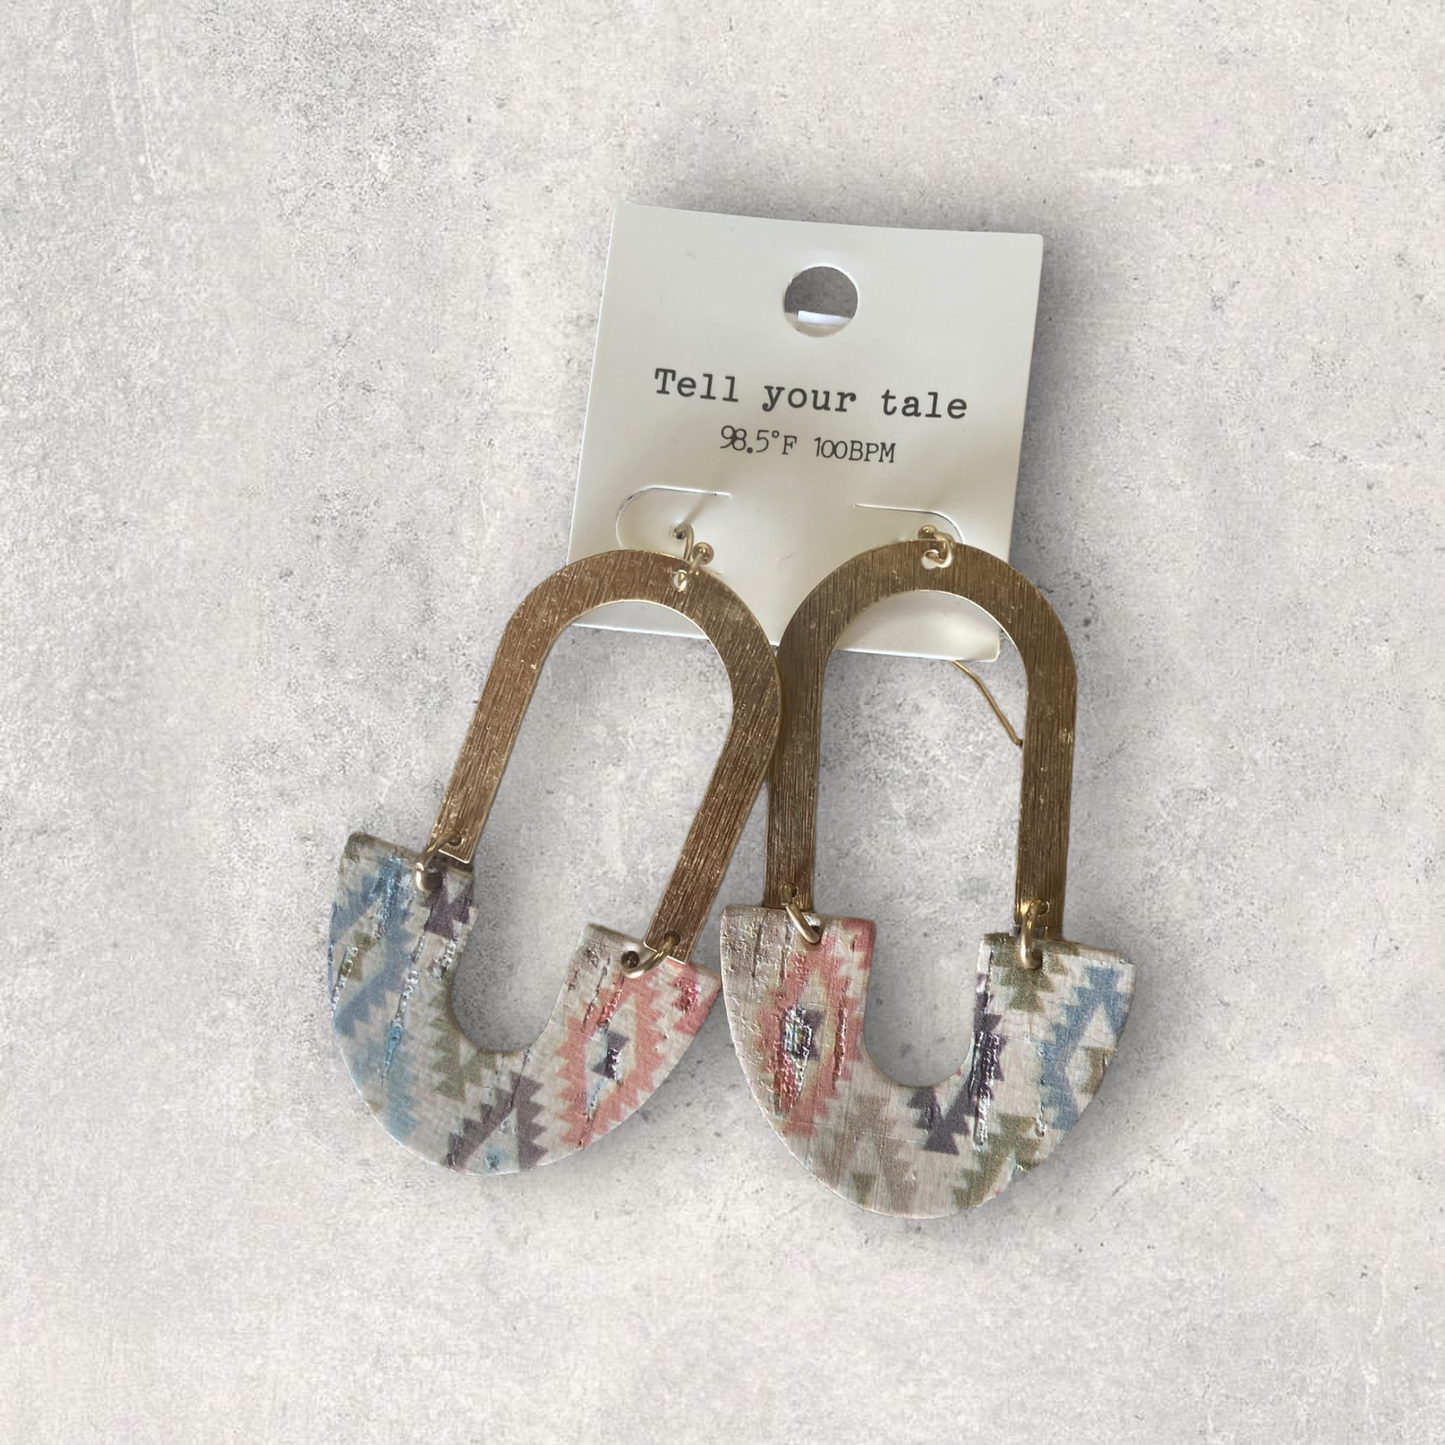 Tell your tale pastel and gold earrings